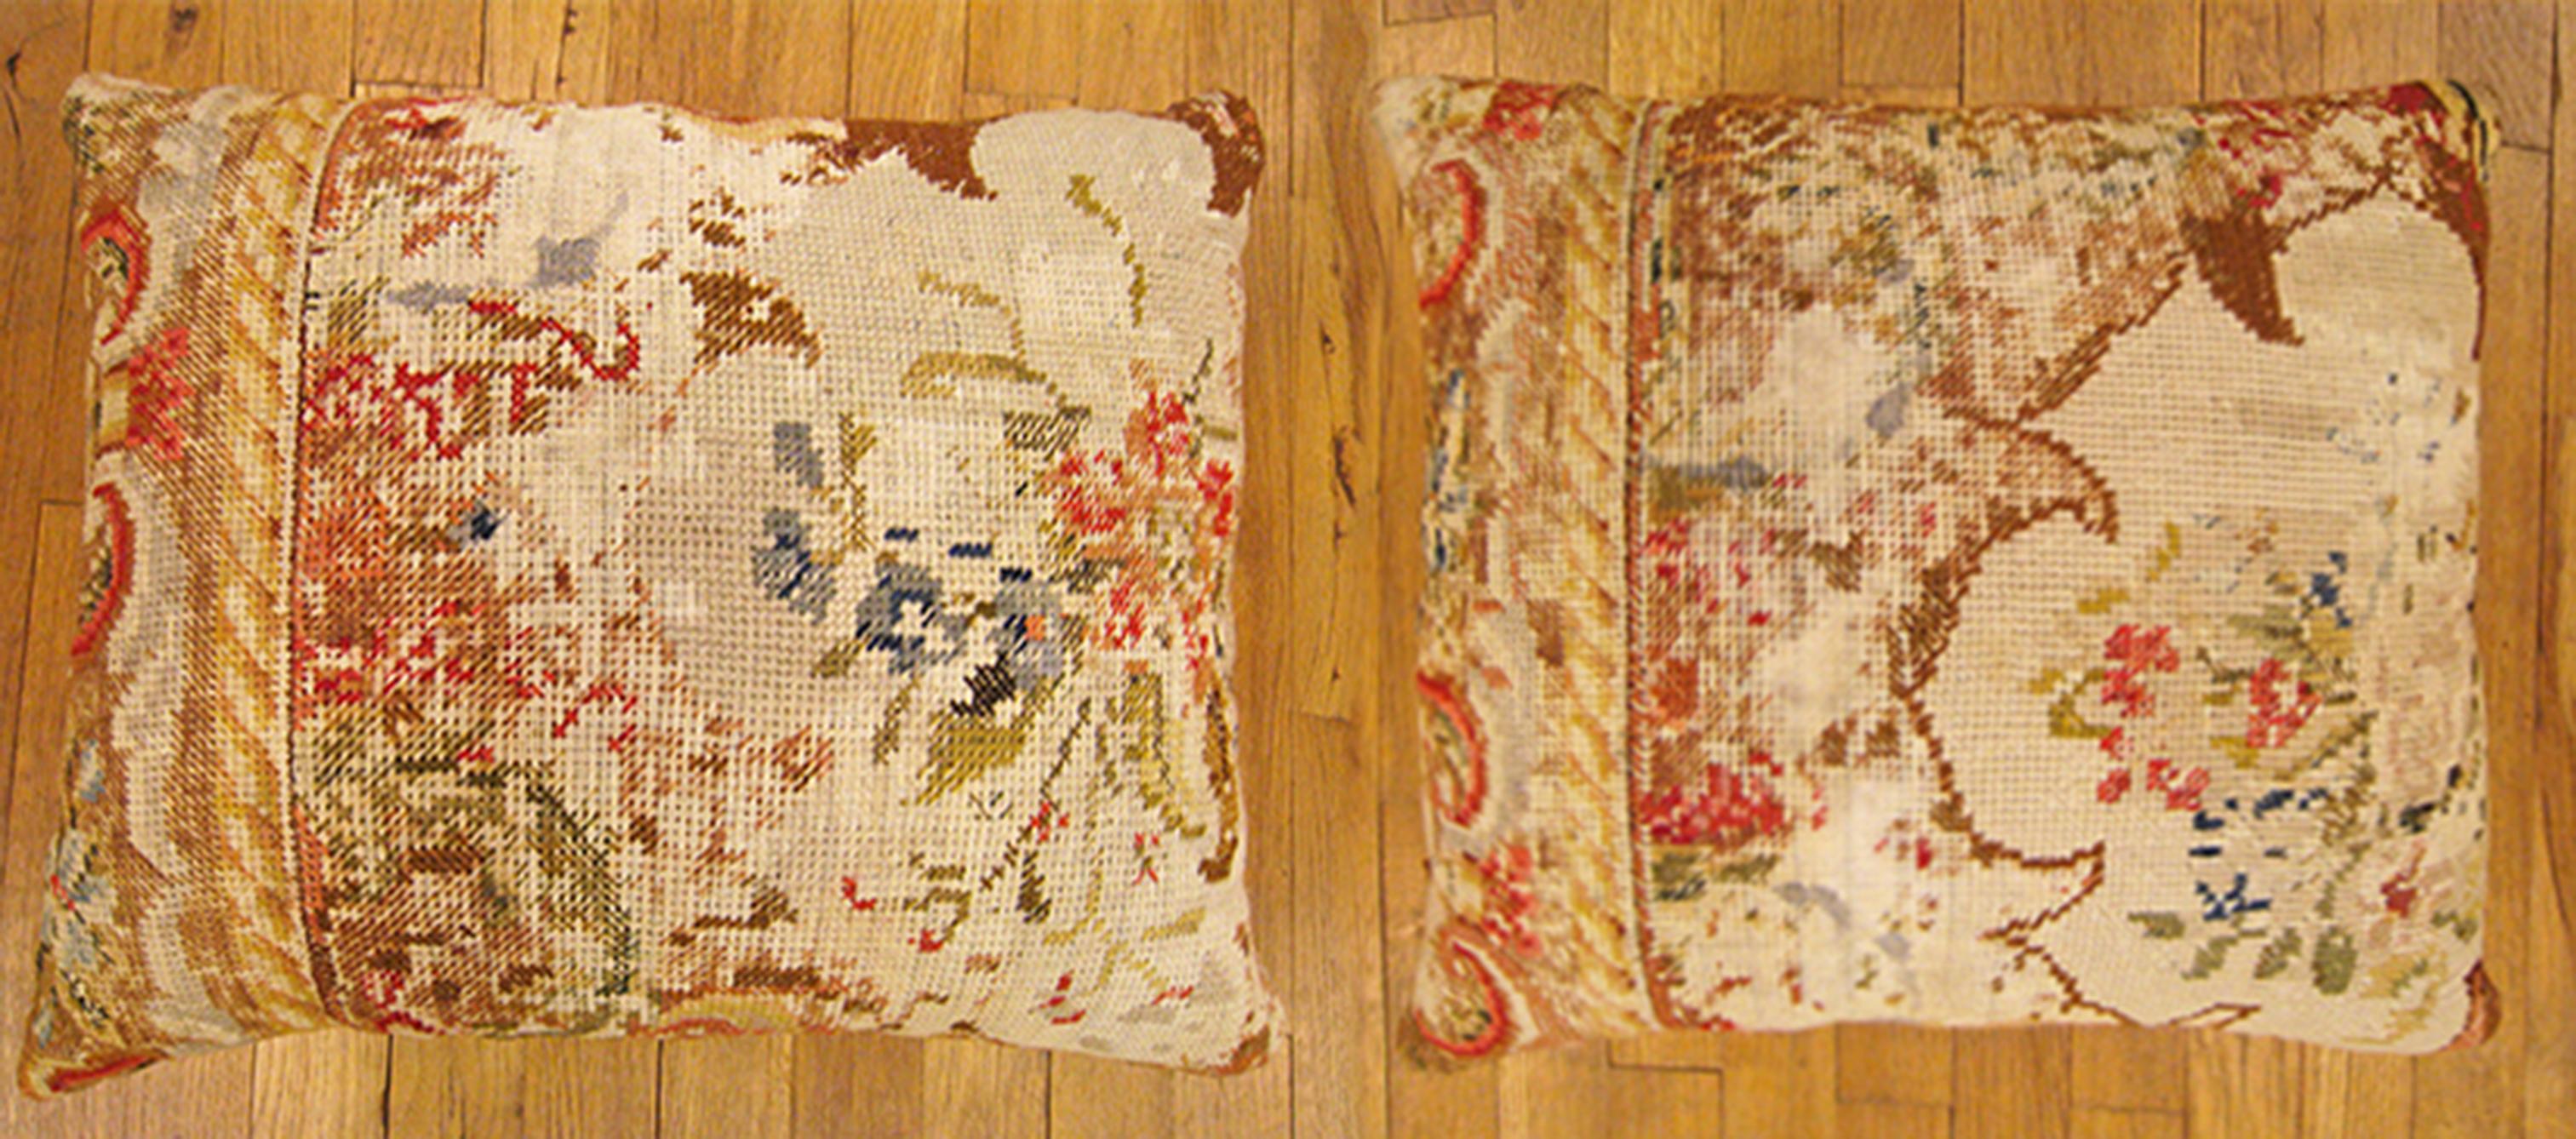 A pair of vintage decorative pillow with a directional floral pattern, sizes 20